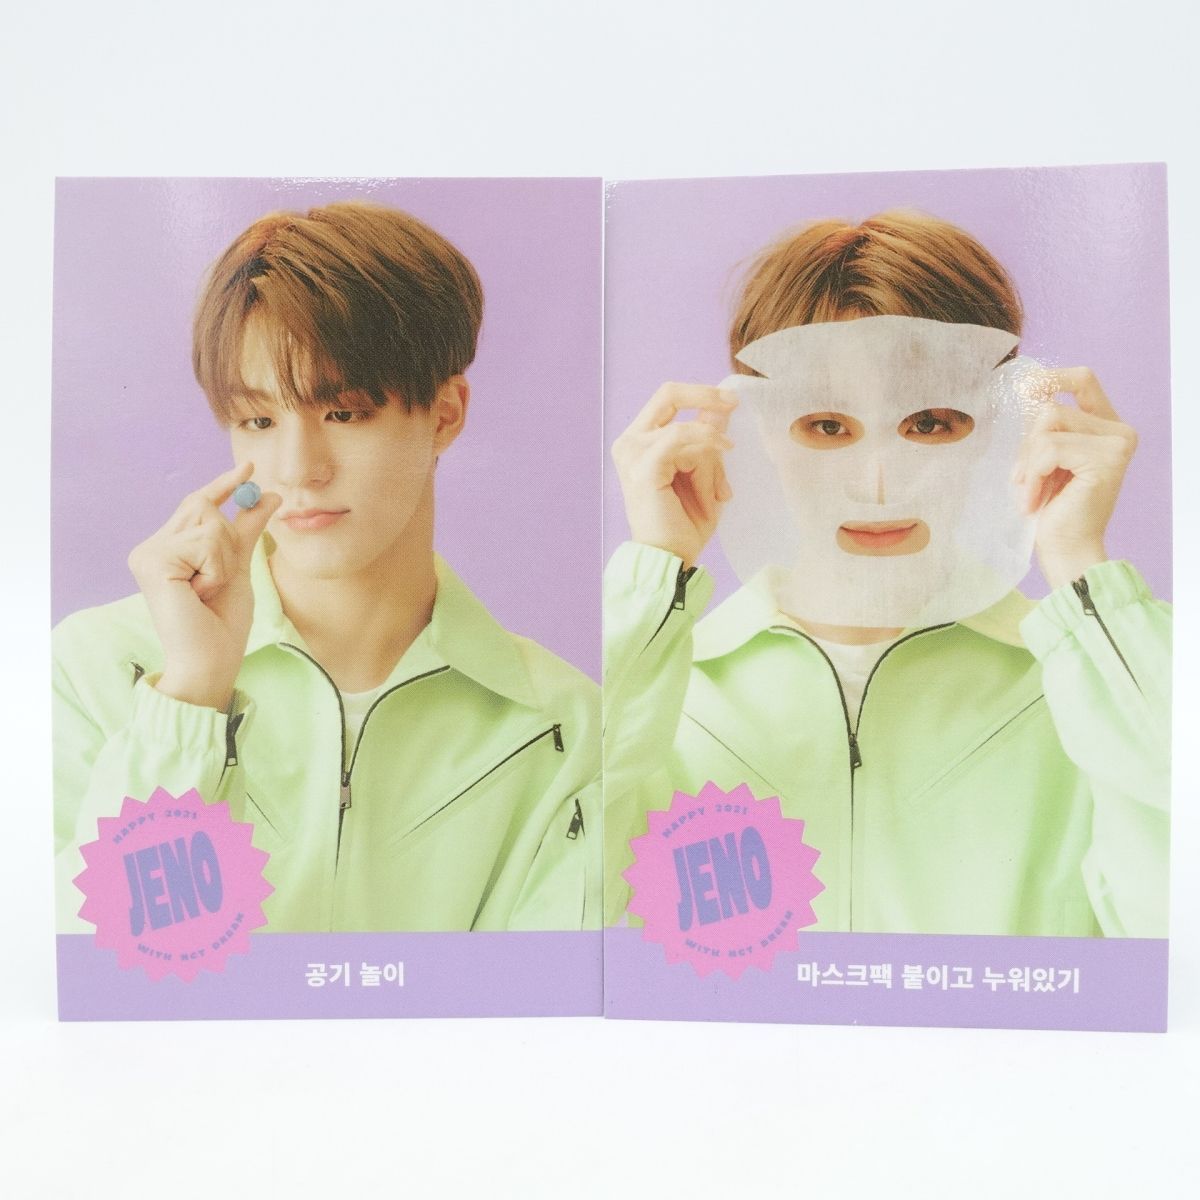 NCT DREAM ジェノ シーグリ トレカ 2021 season's greetings LET'S PARTY GAME CARD SET  JENO フォト カード